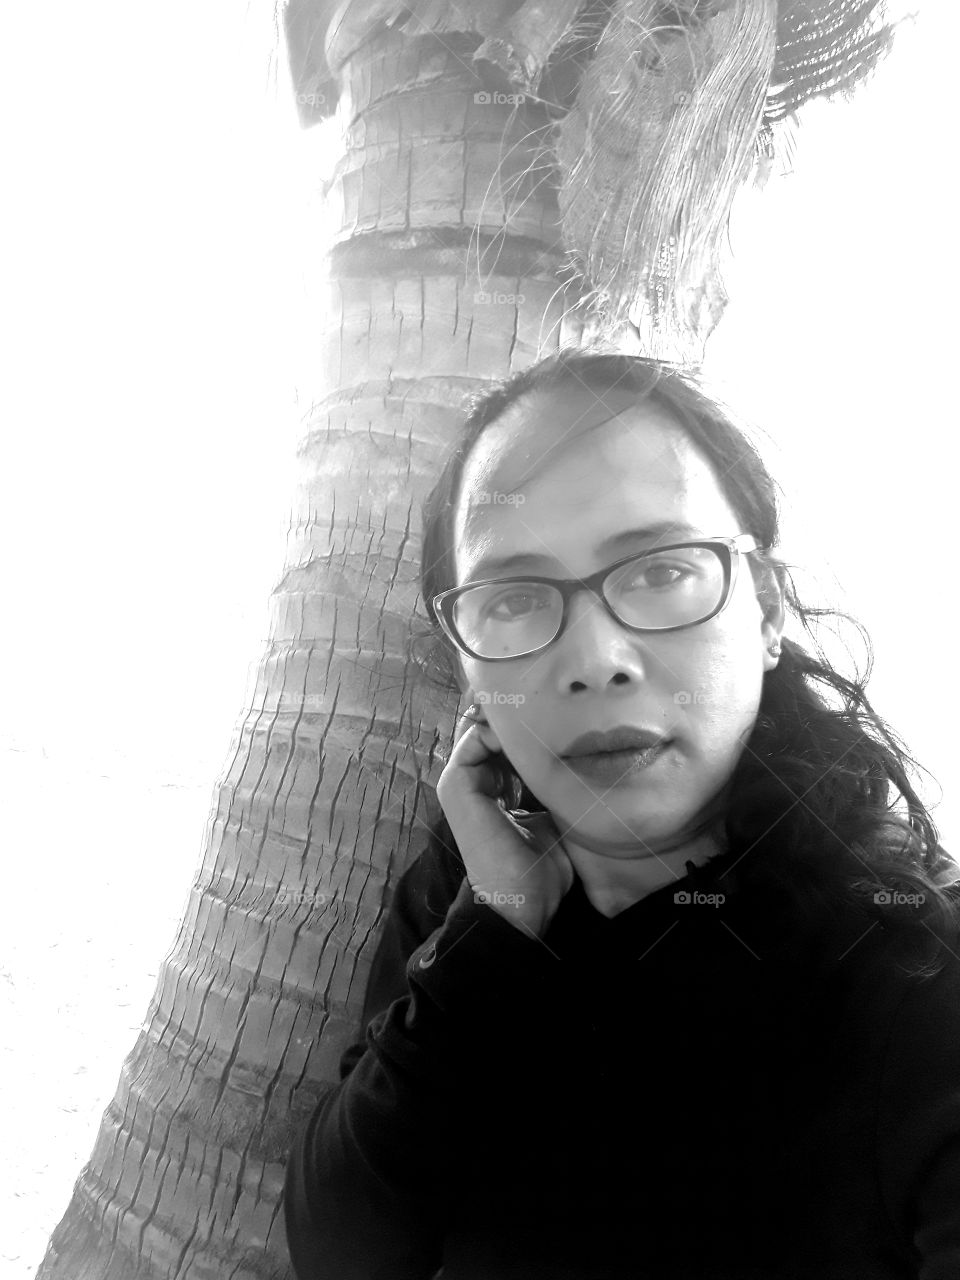 Baring my soul in black and white, my life in colours. I love taking selfies in black and white. "To see in color is a delight for the eye but to see in black and white is a delight for the soul."― Andri Cauldwell